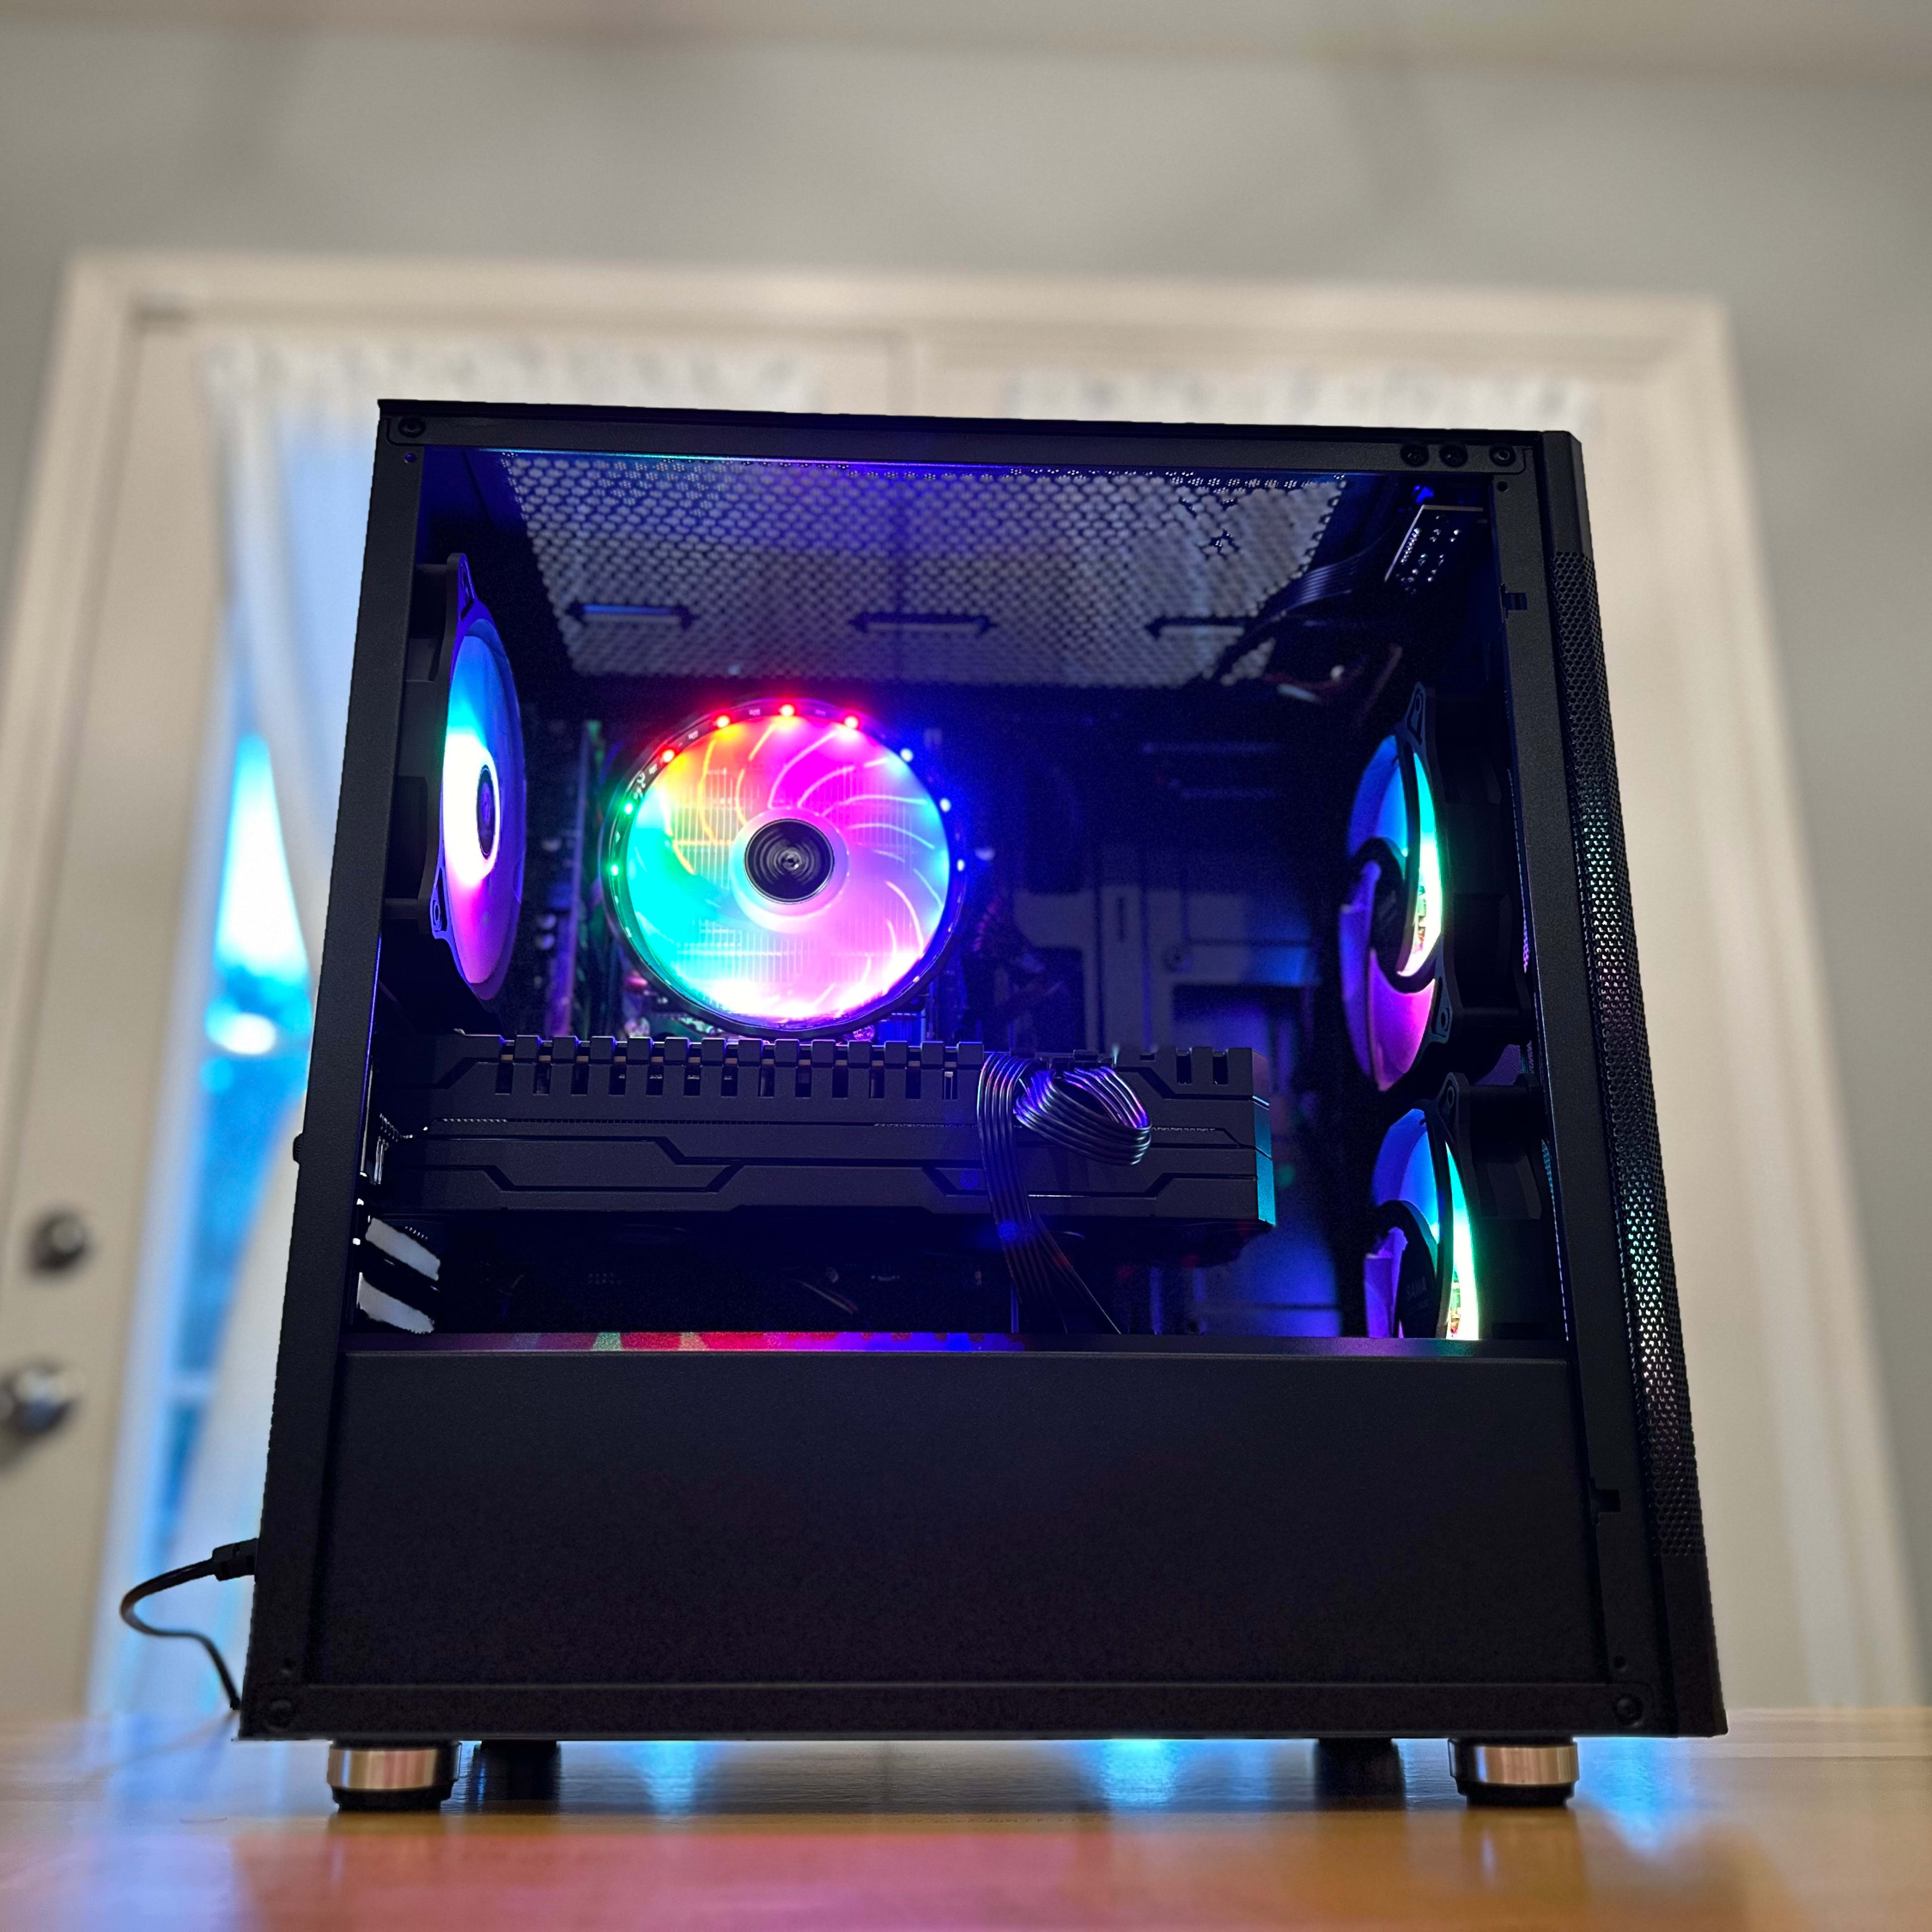 ⚫️ 🥷 | RX 5700 XT, Core i7, 32gb DDR4, 1tb SSD, WiFi Equipped Streaming/Gaming PC